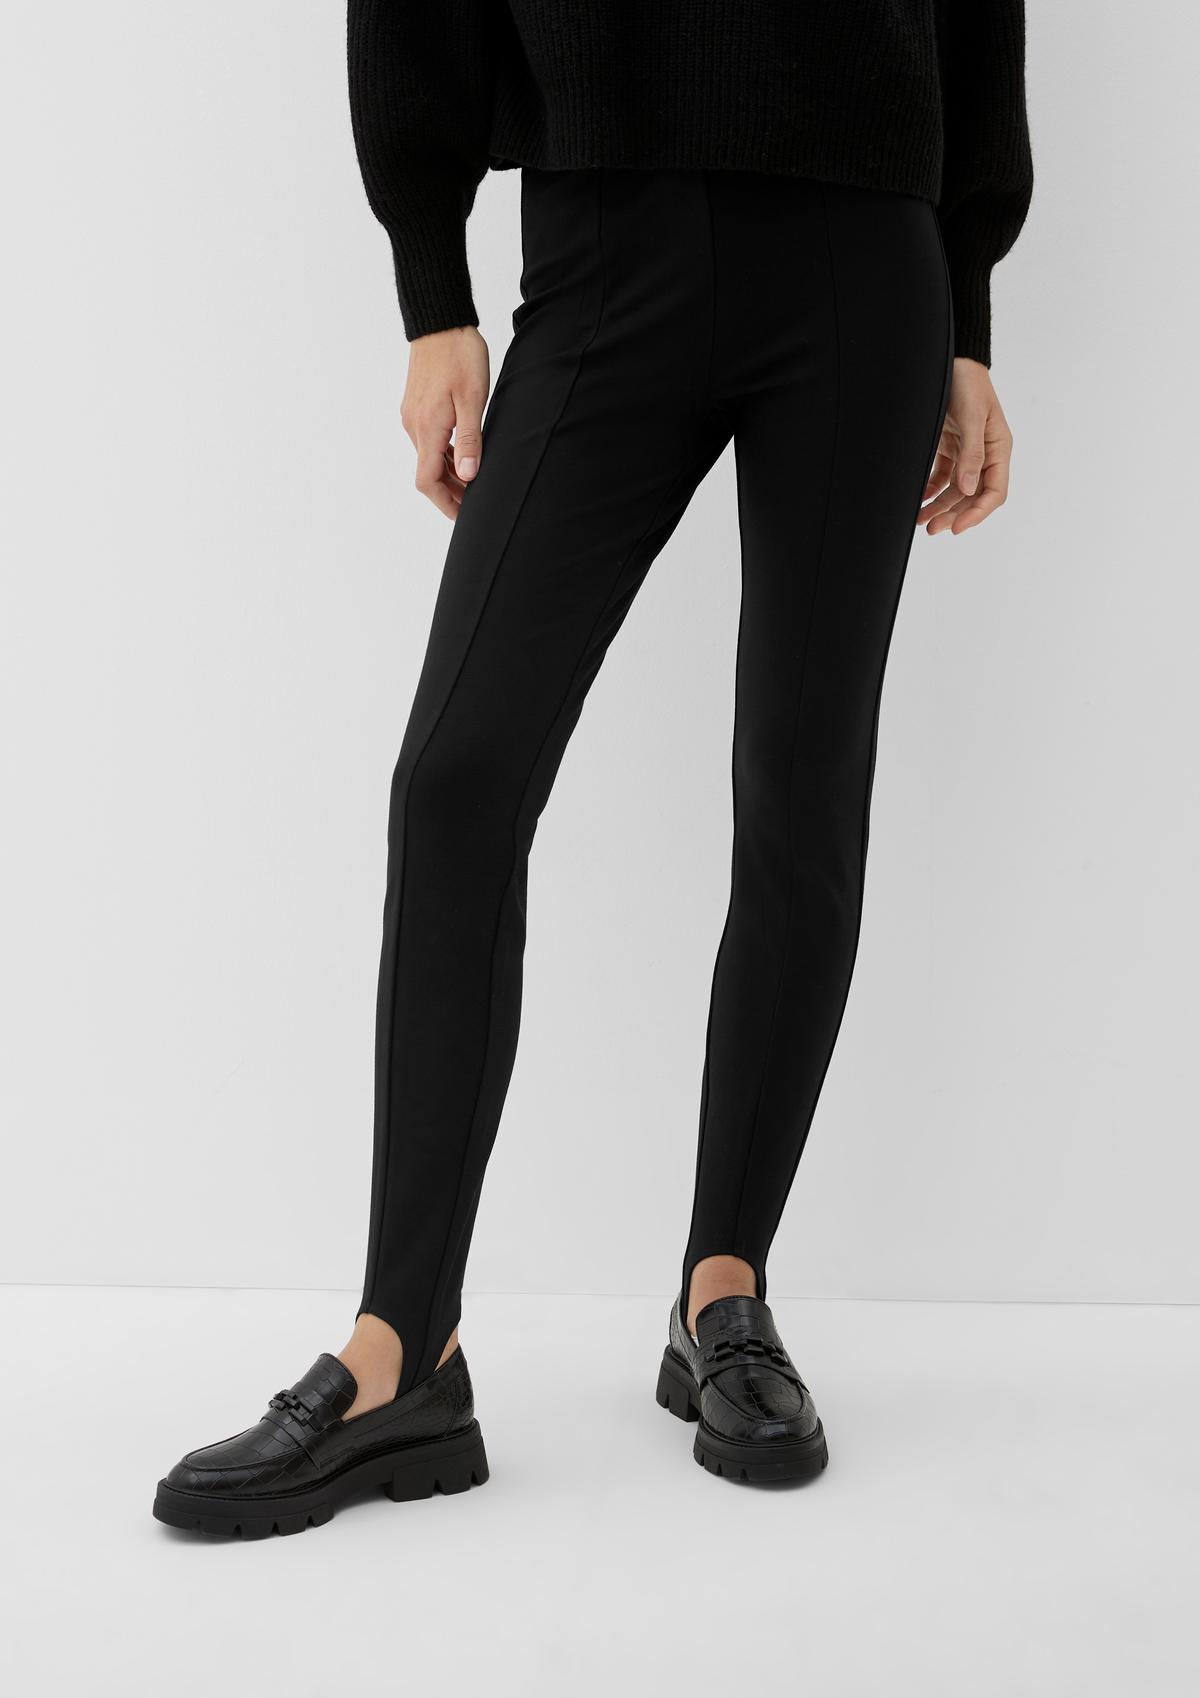 leather-look Leggings - black with front a